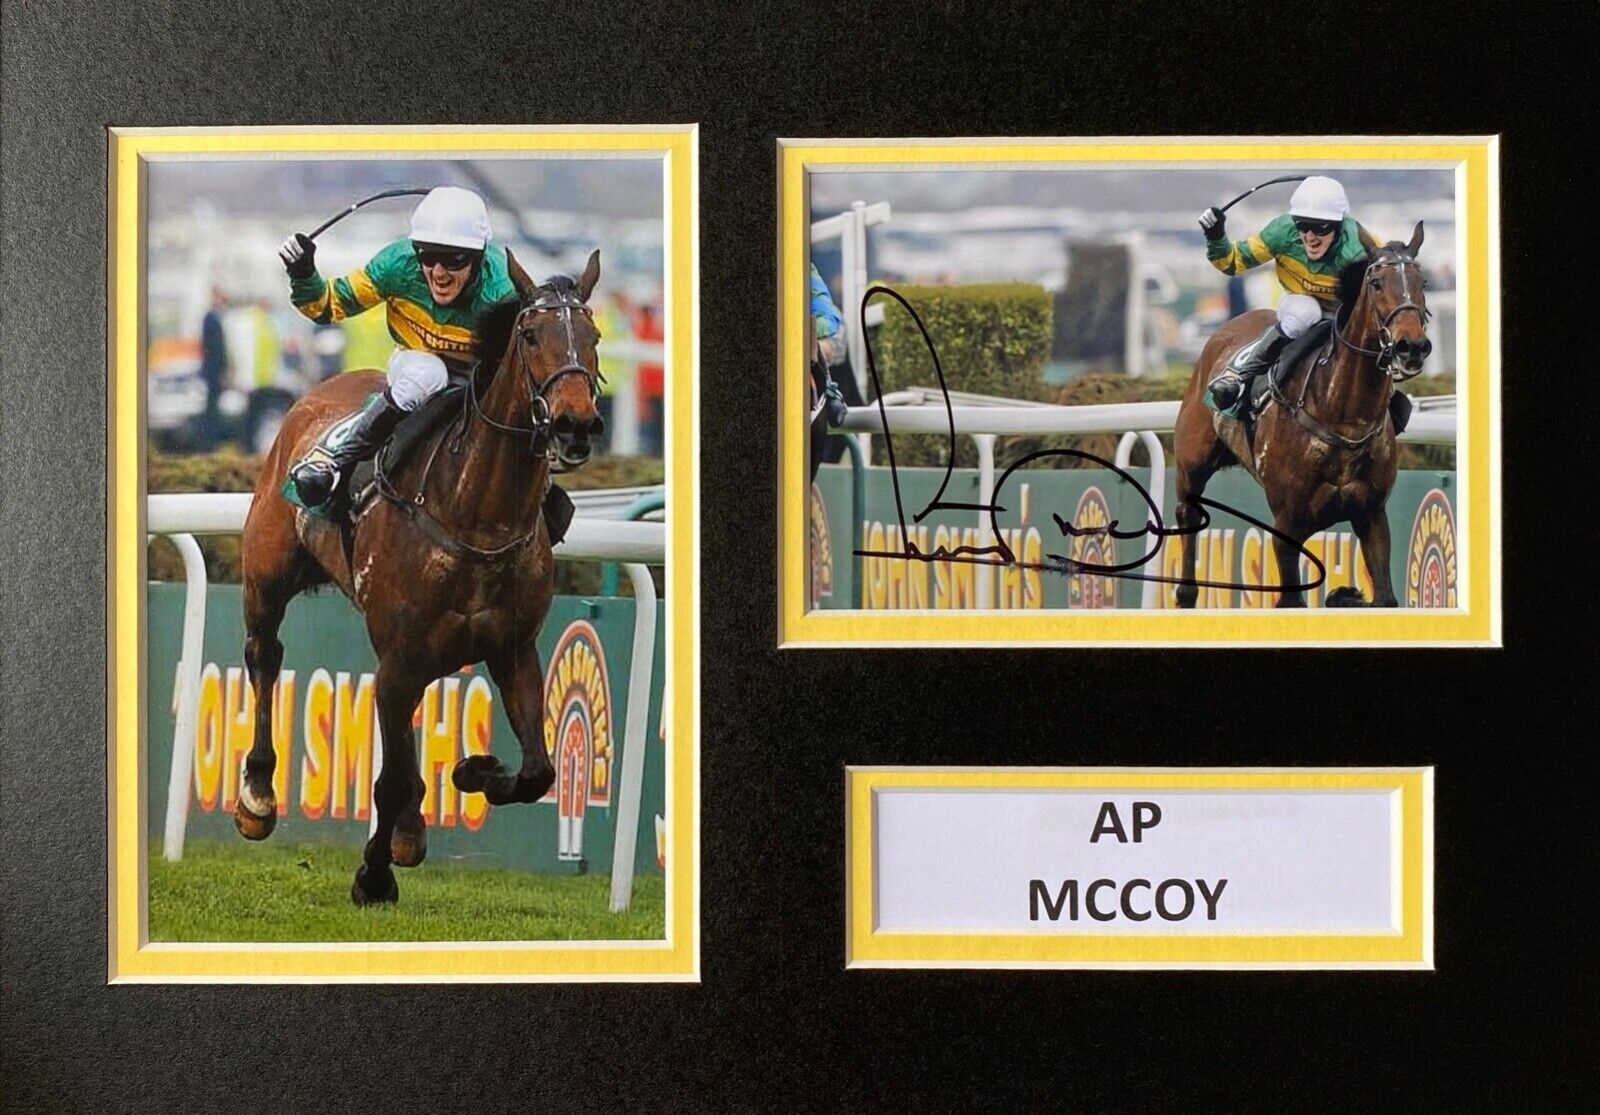 AP MCCOY HAND SIGNED A4 Photo Poster painting MOUNT DISPLAY DON'T PUSH IT AUTOGRAPH 1